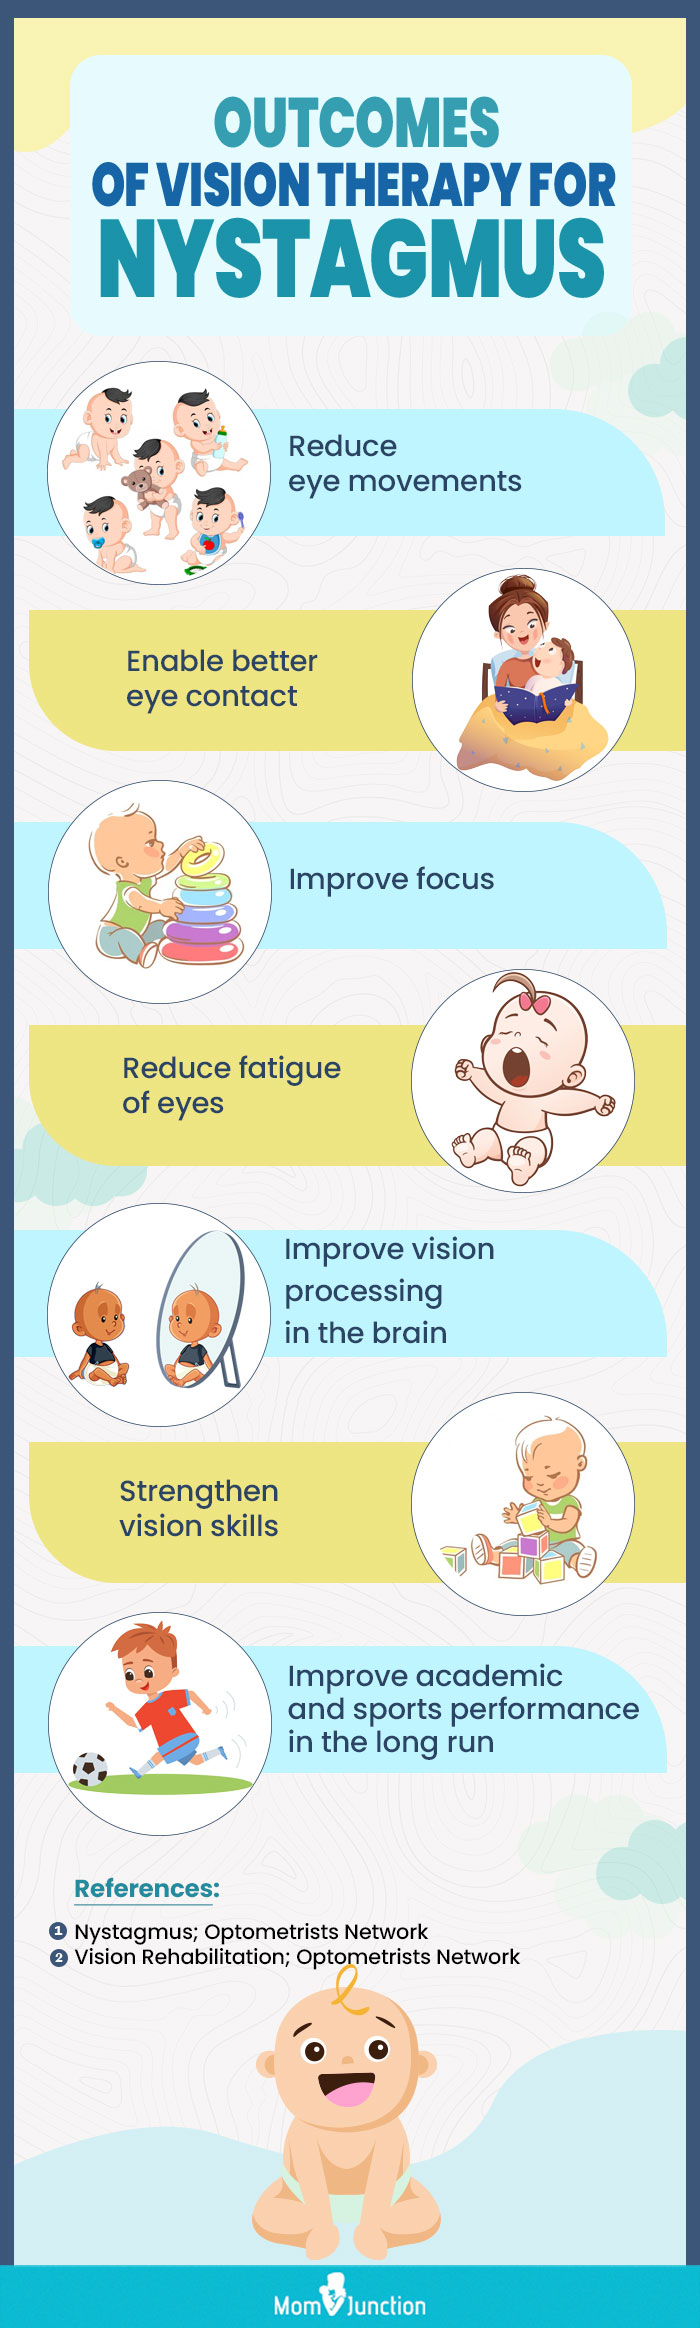 outcomes of vision therapy for nystagmus (infographic)